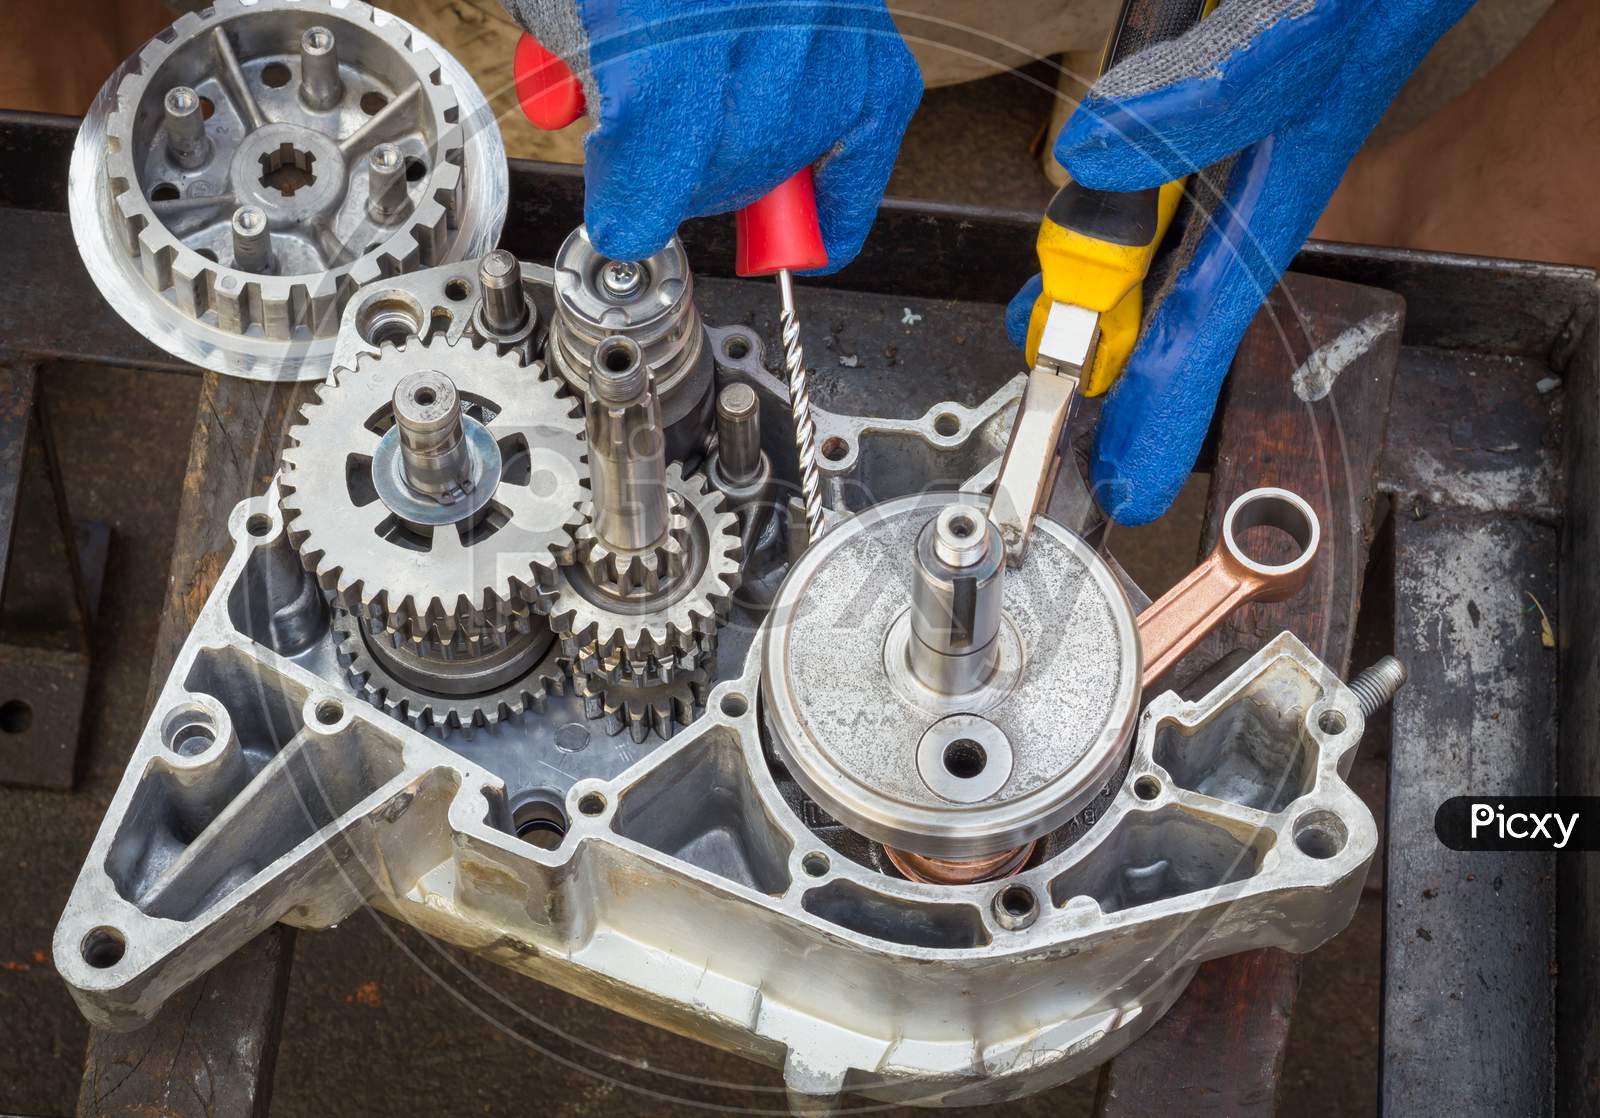 A Motorcycle Engine with Crankshaft,gears,bearings are being Assembled after due clean up at a 2 wheeler  Garage in Mysuru,India.